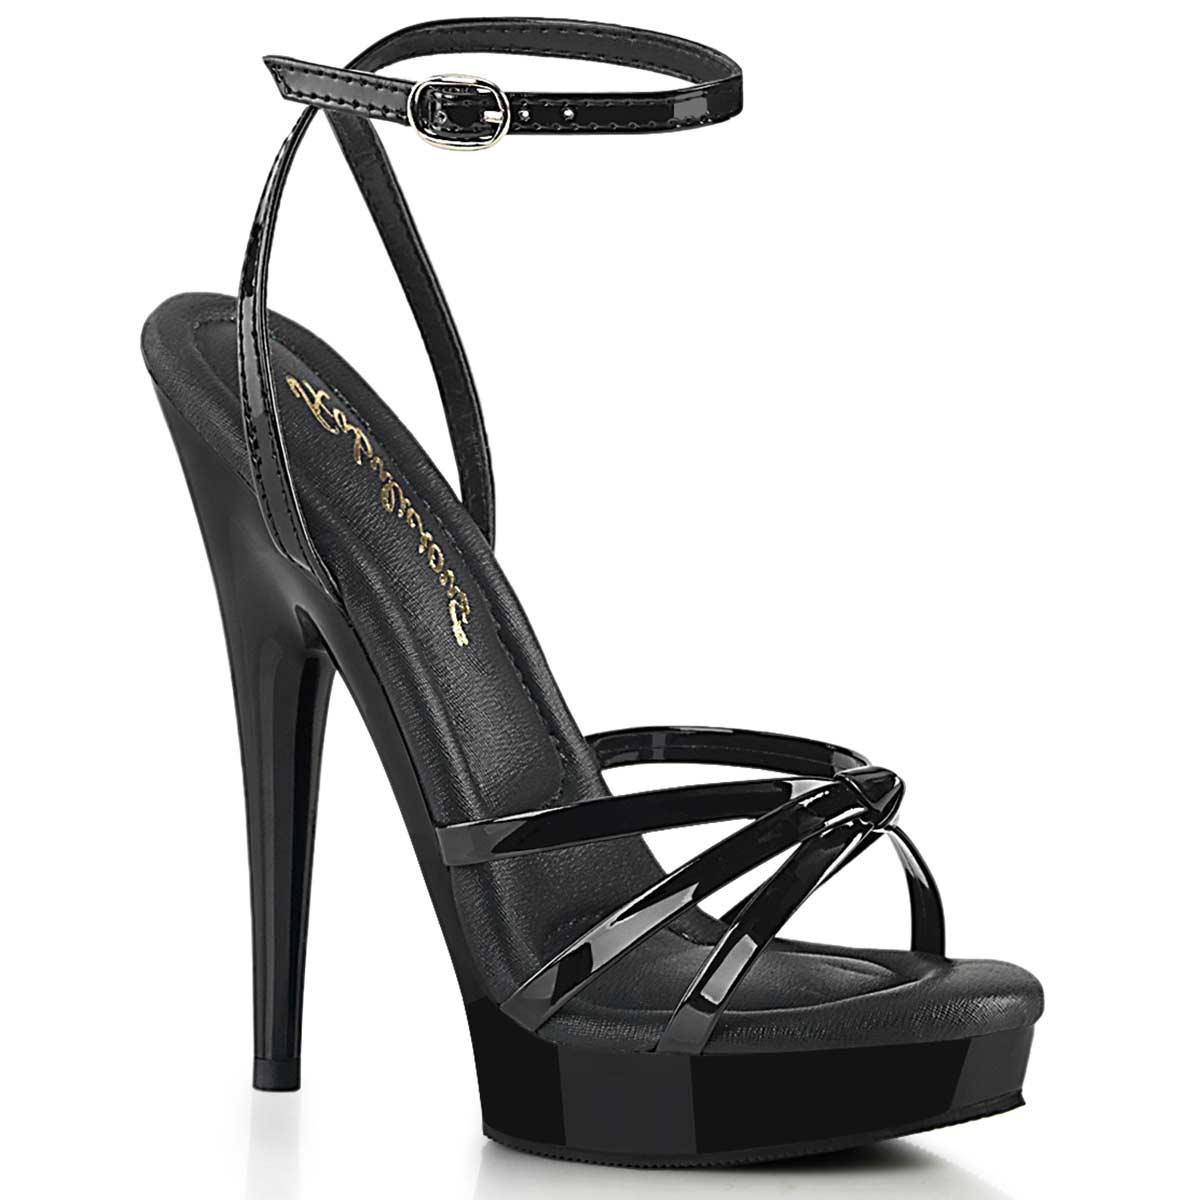 Pleaser Sultry-638 - Black Patent in Sexy Heels & Platforms - $51.03